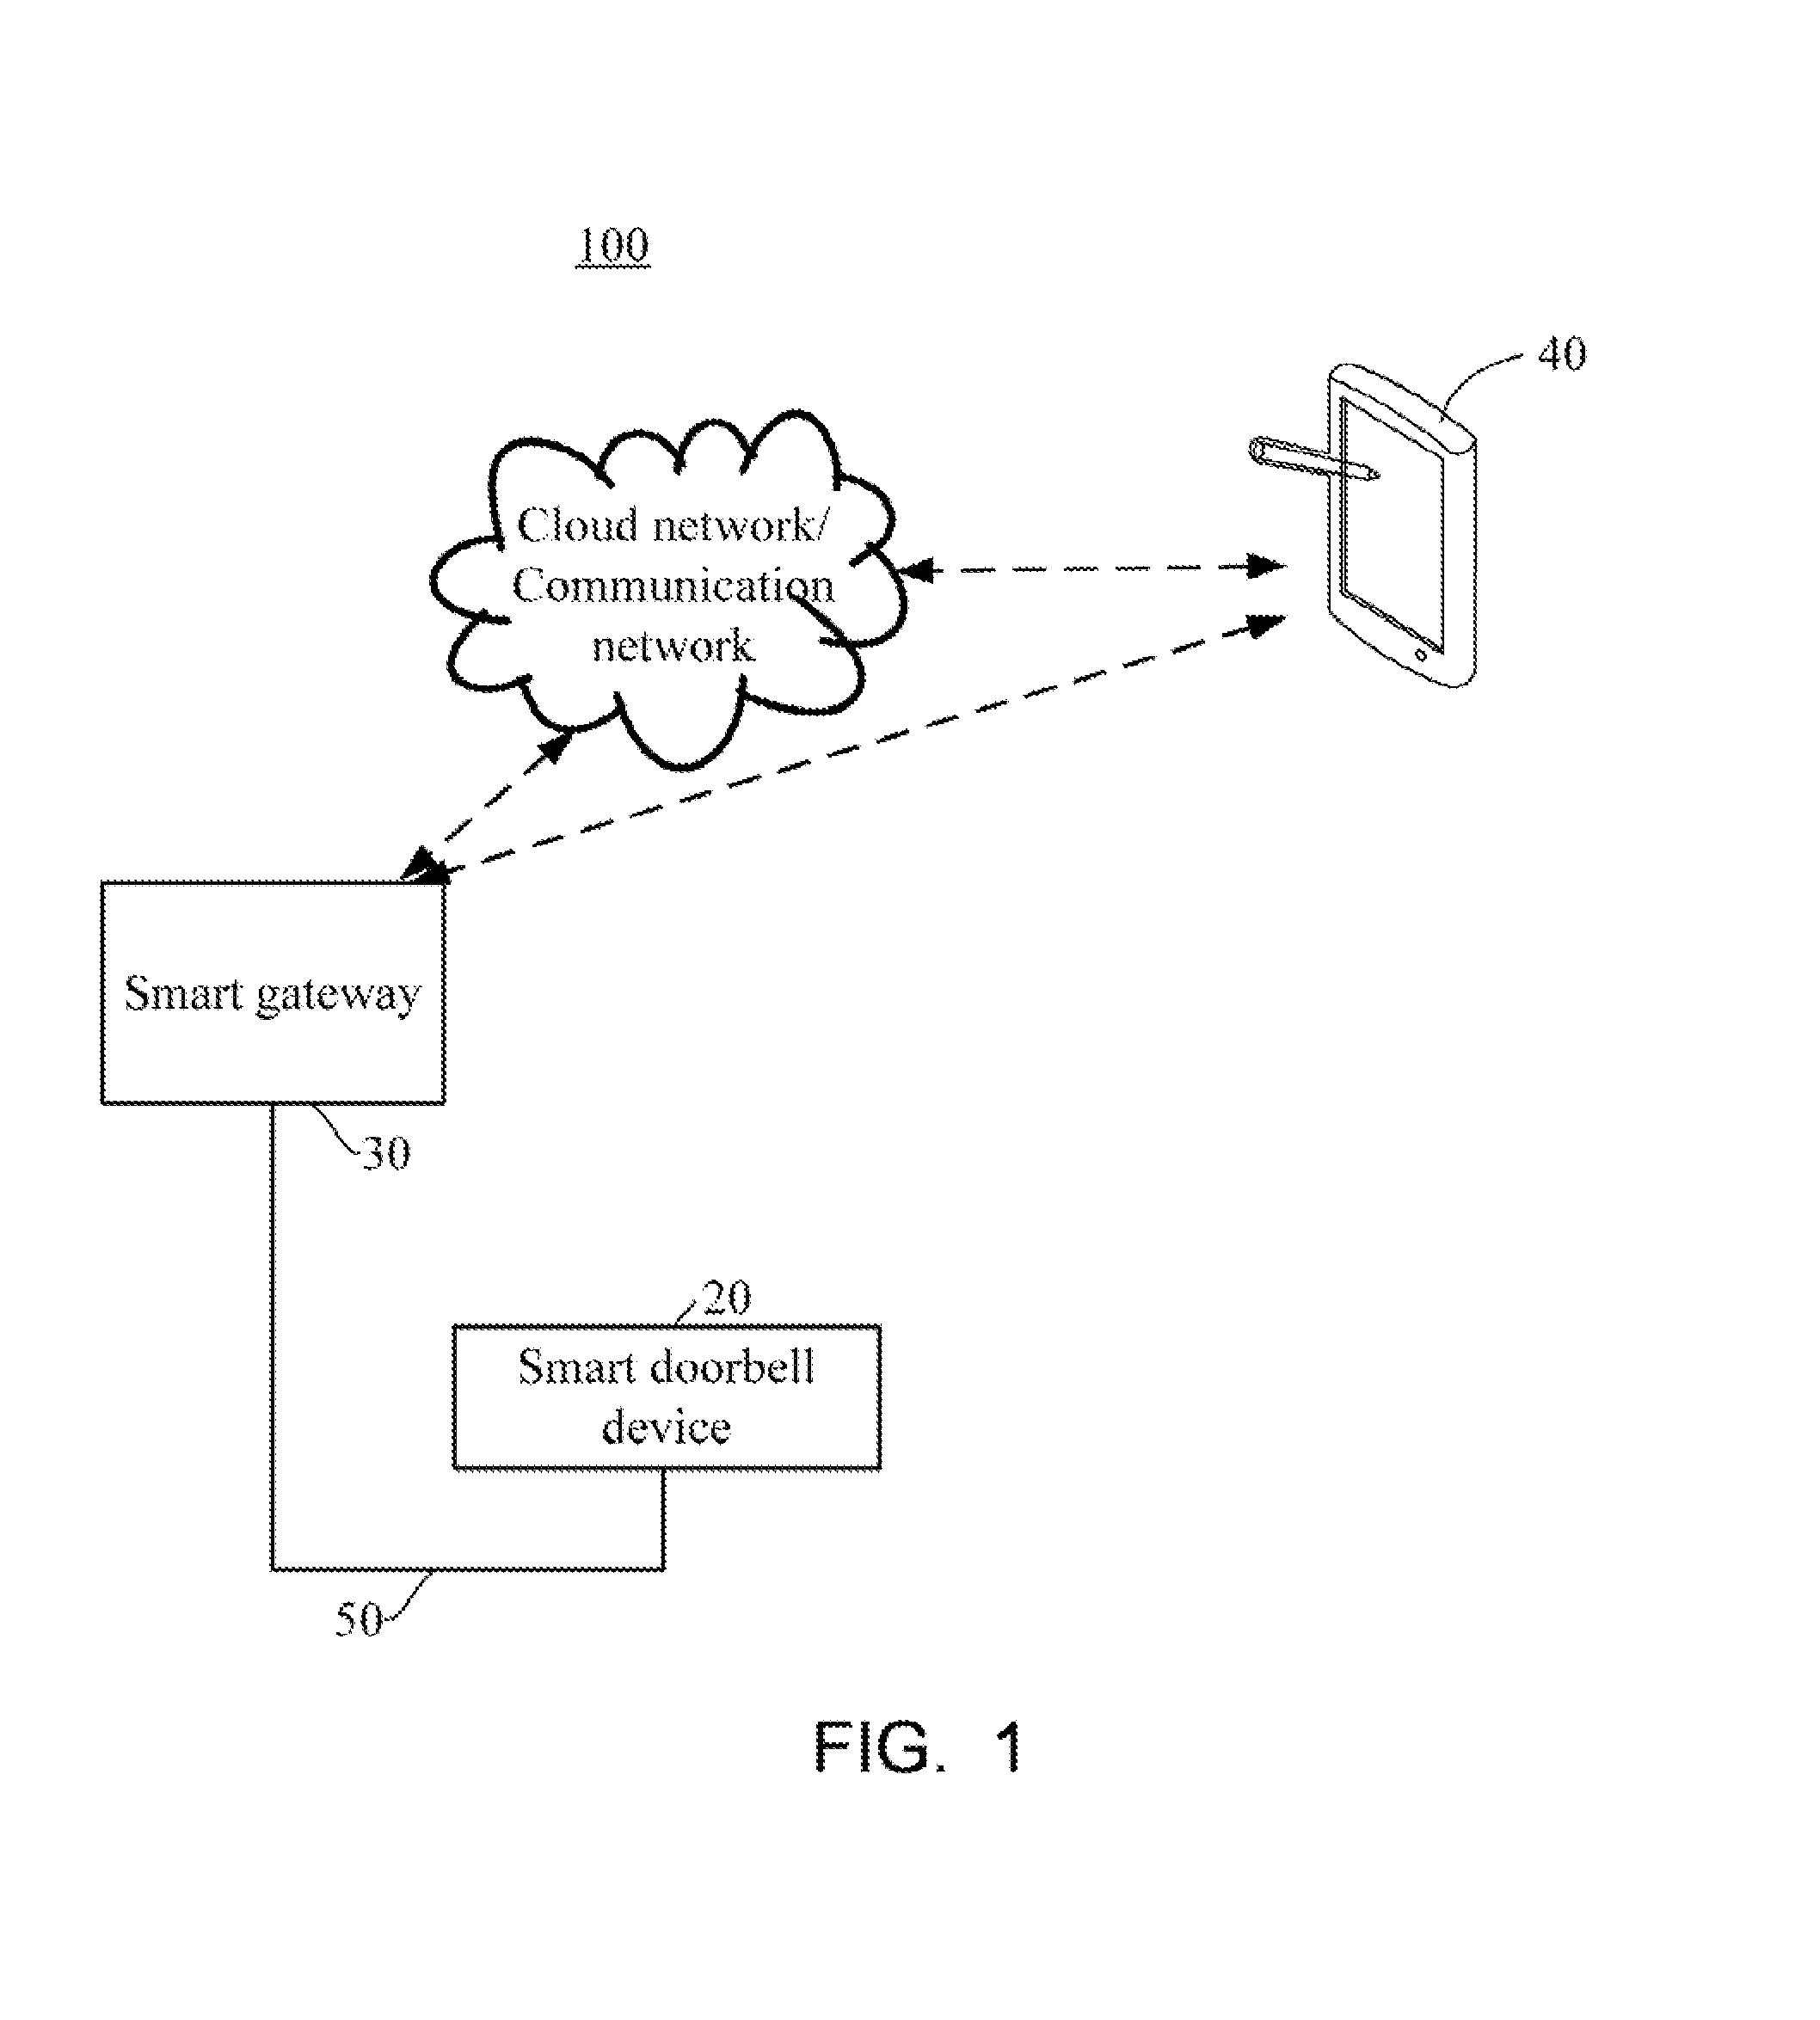 Remote doorbell control system and related smart doorbell device